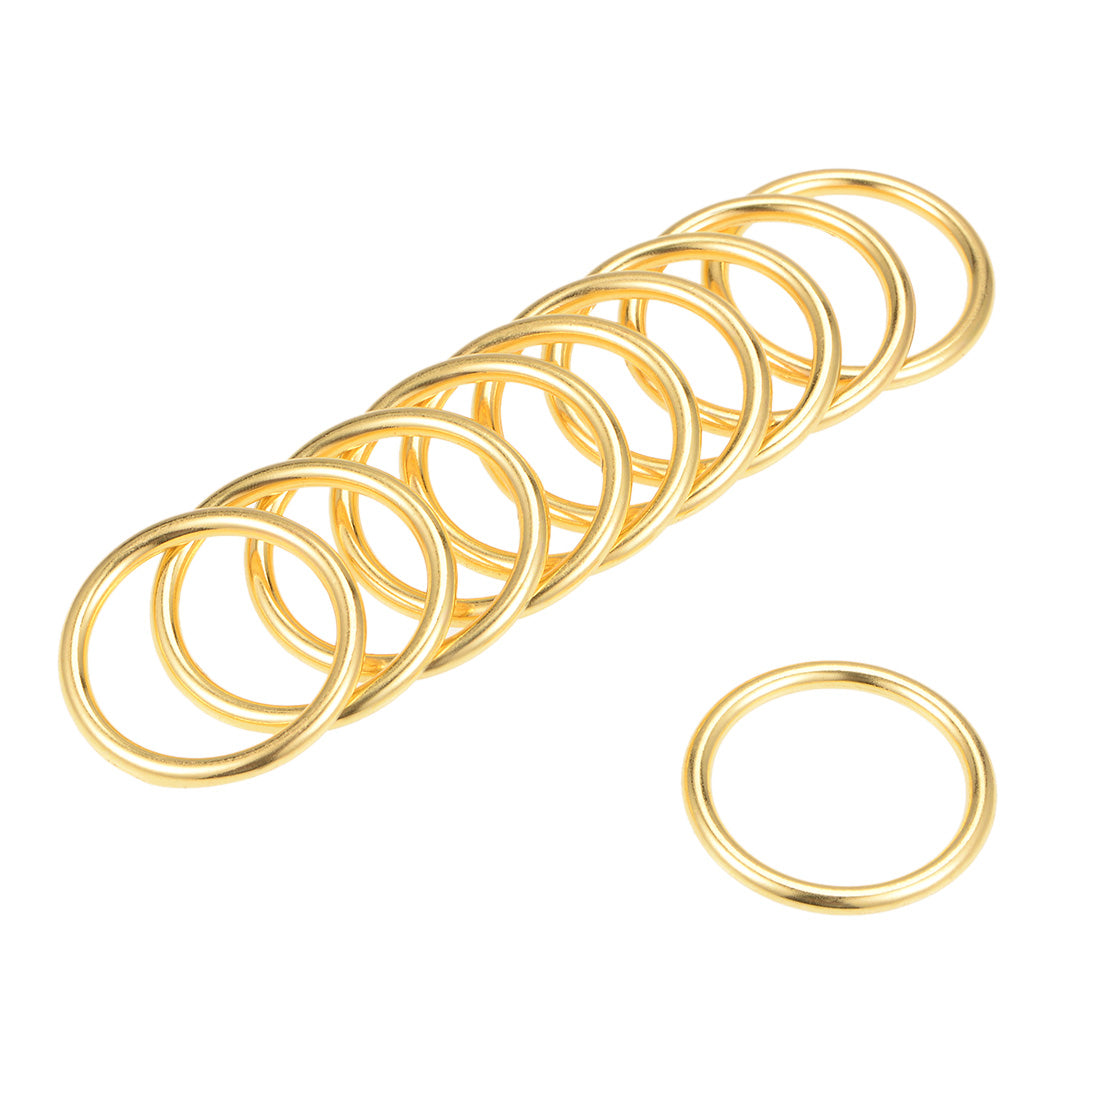 uxcell Uxcell O Ring Buckle 25mm(1") ID 3mm Thickness Zinc Alloy O-Rings for Hardware Bags Belts Craft DIY Accessories, Gold Tone 25pcs